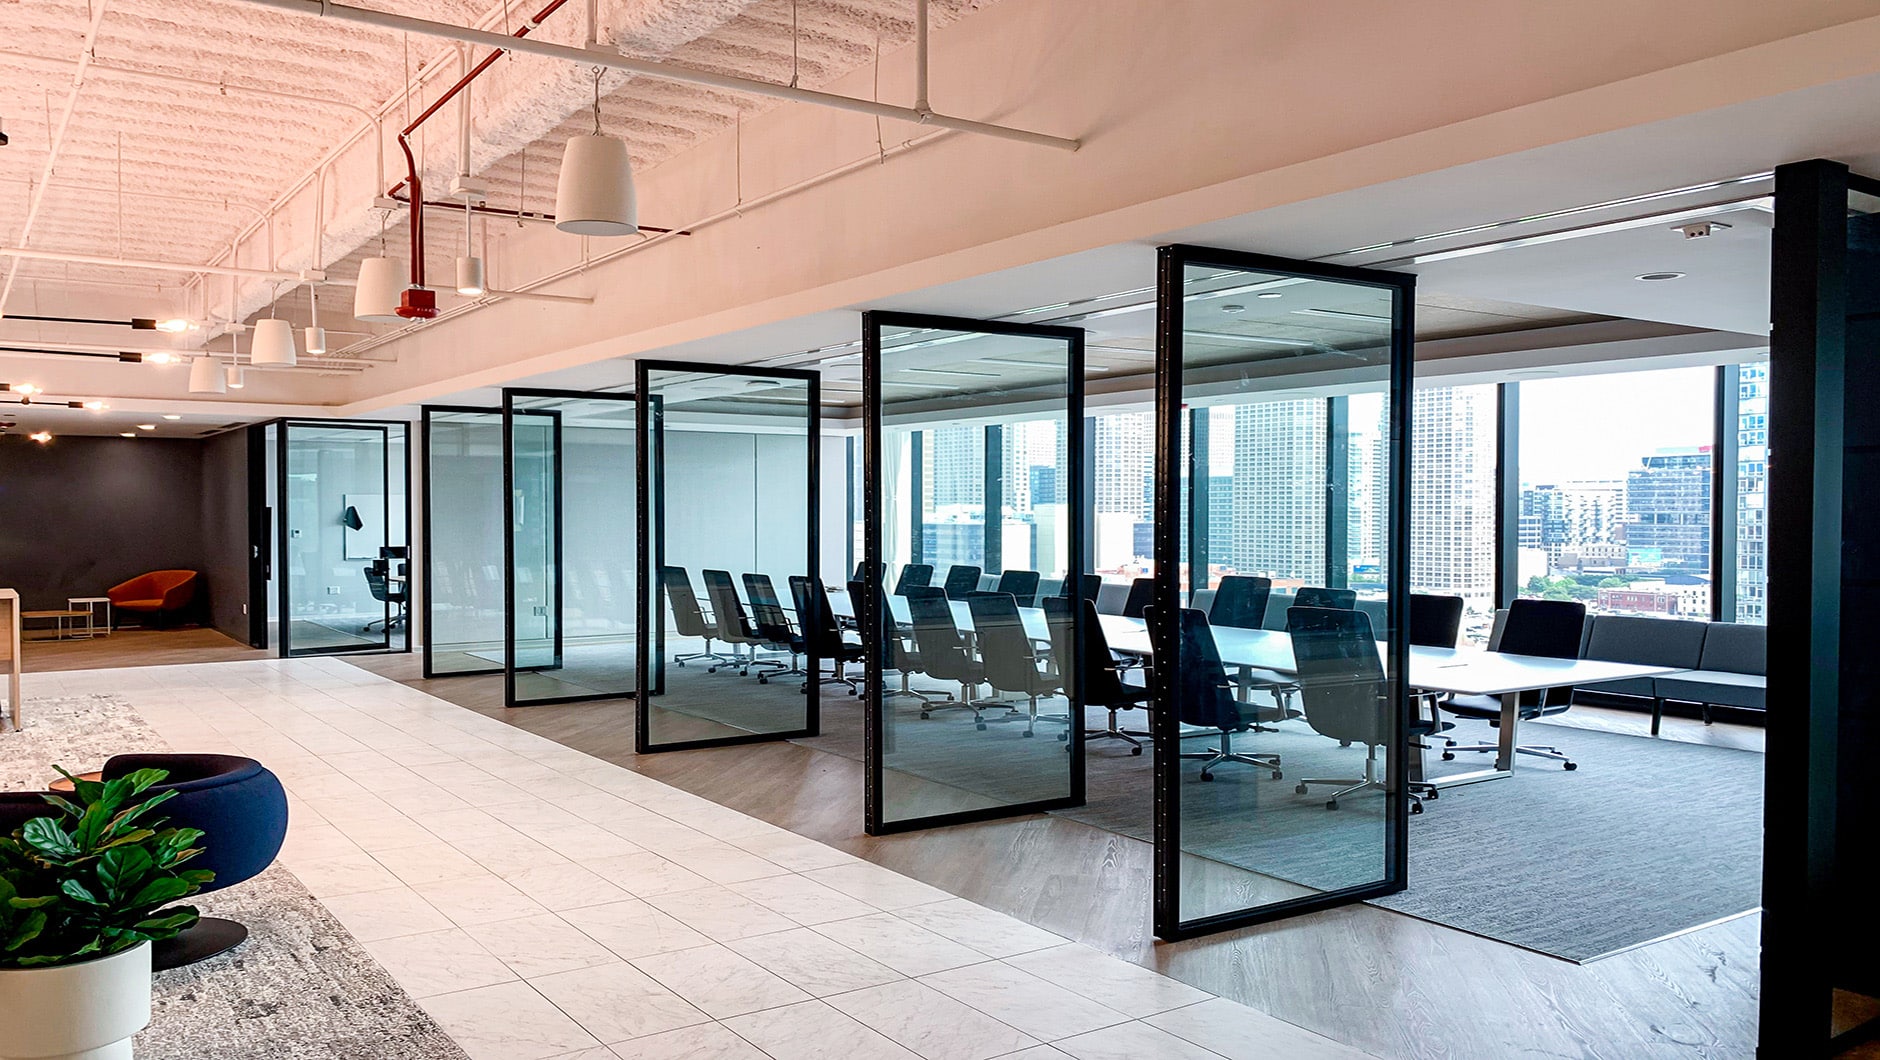 Office conference room with glass walls open.